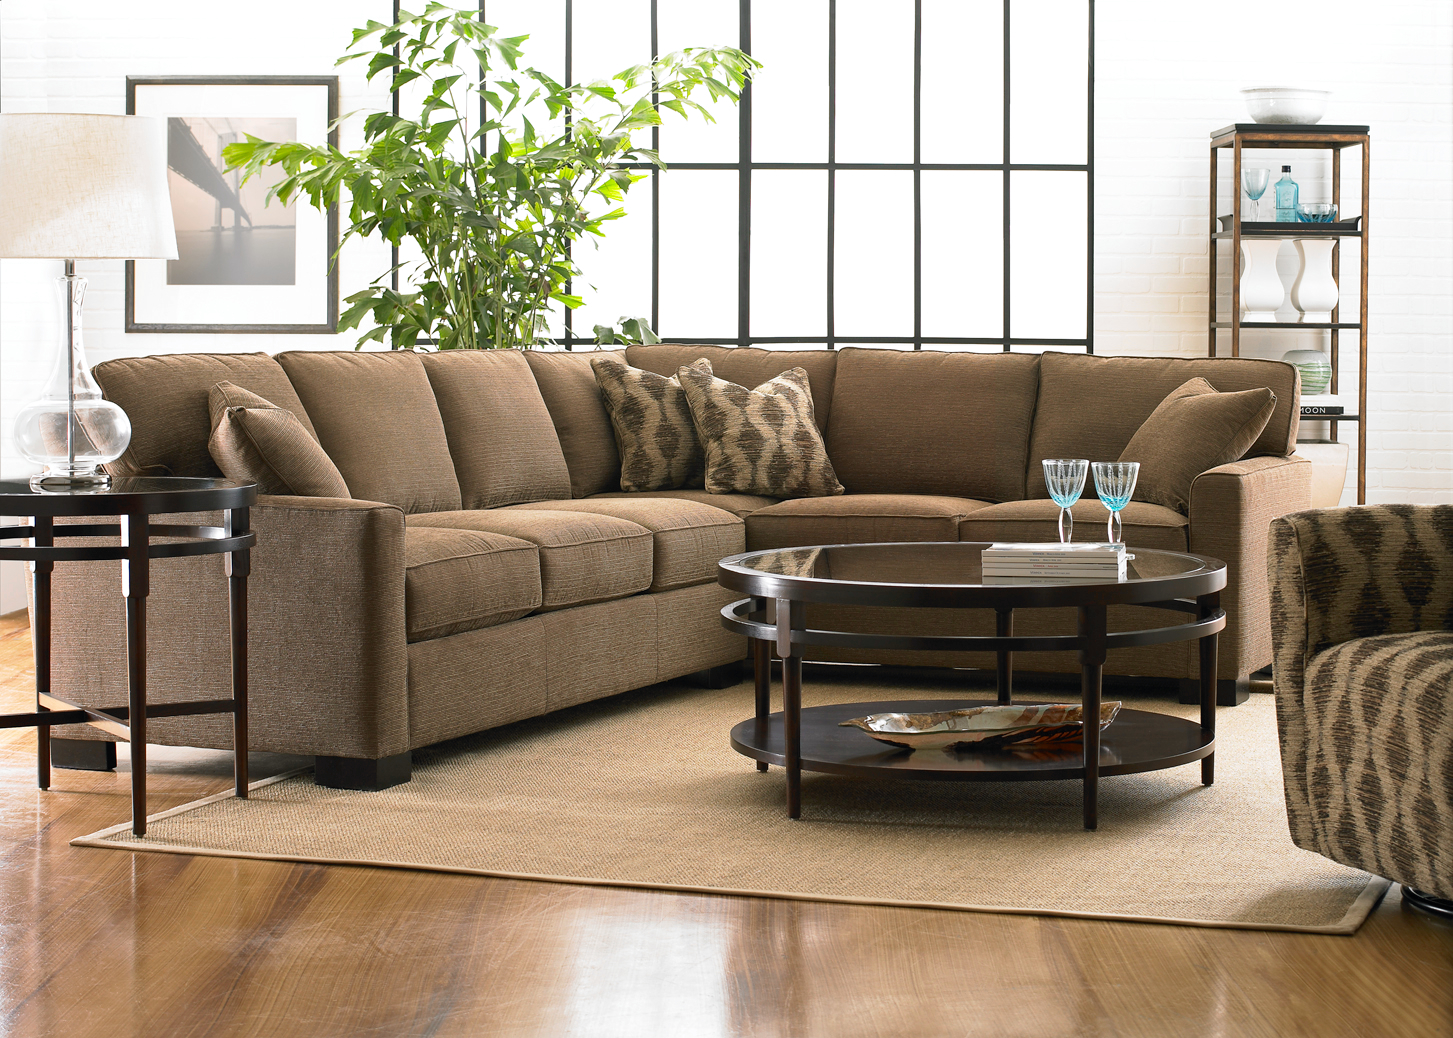 Typical Size Of A Living Room Sectional